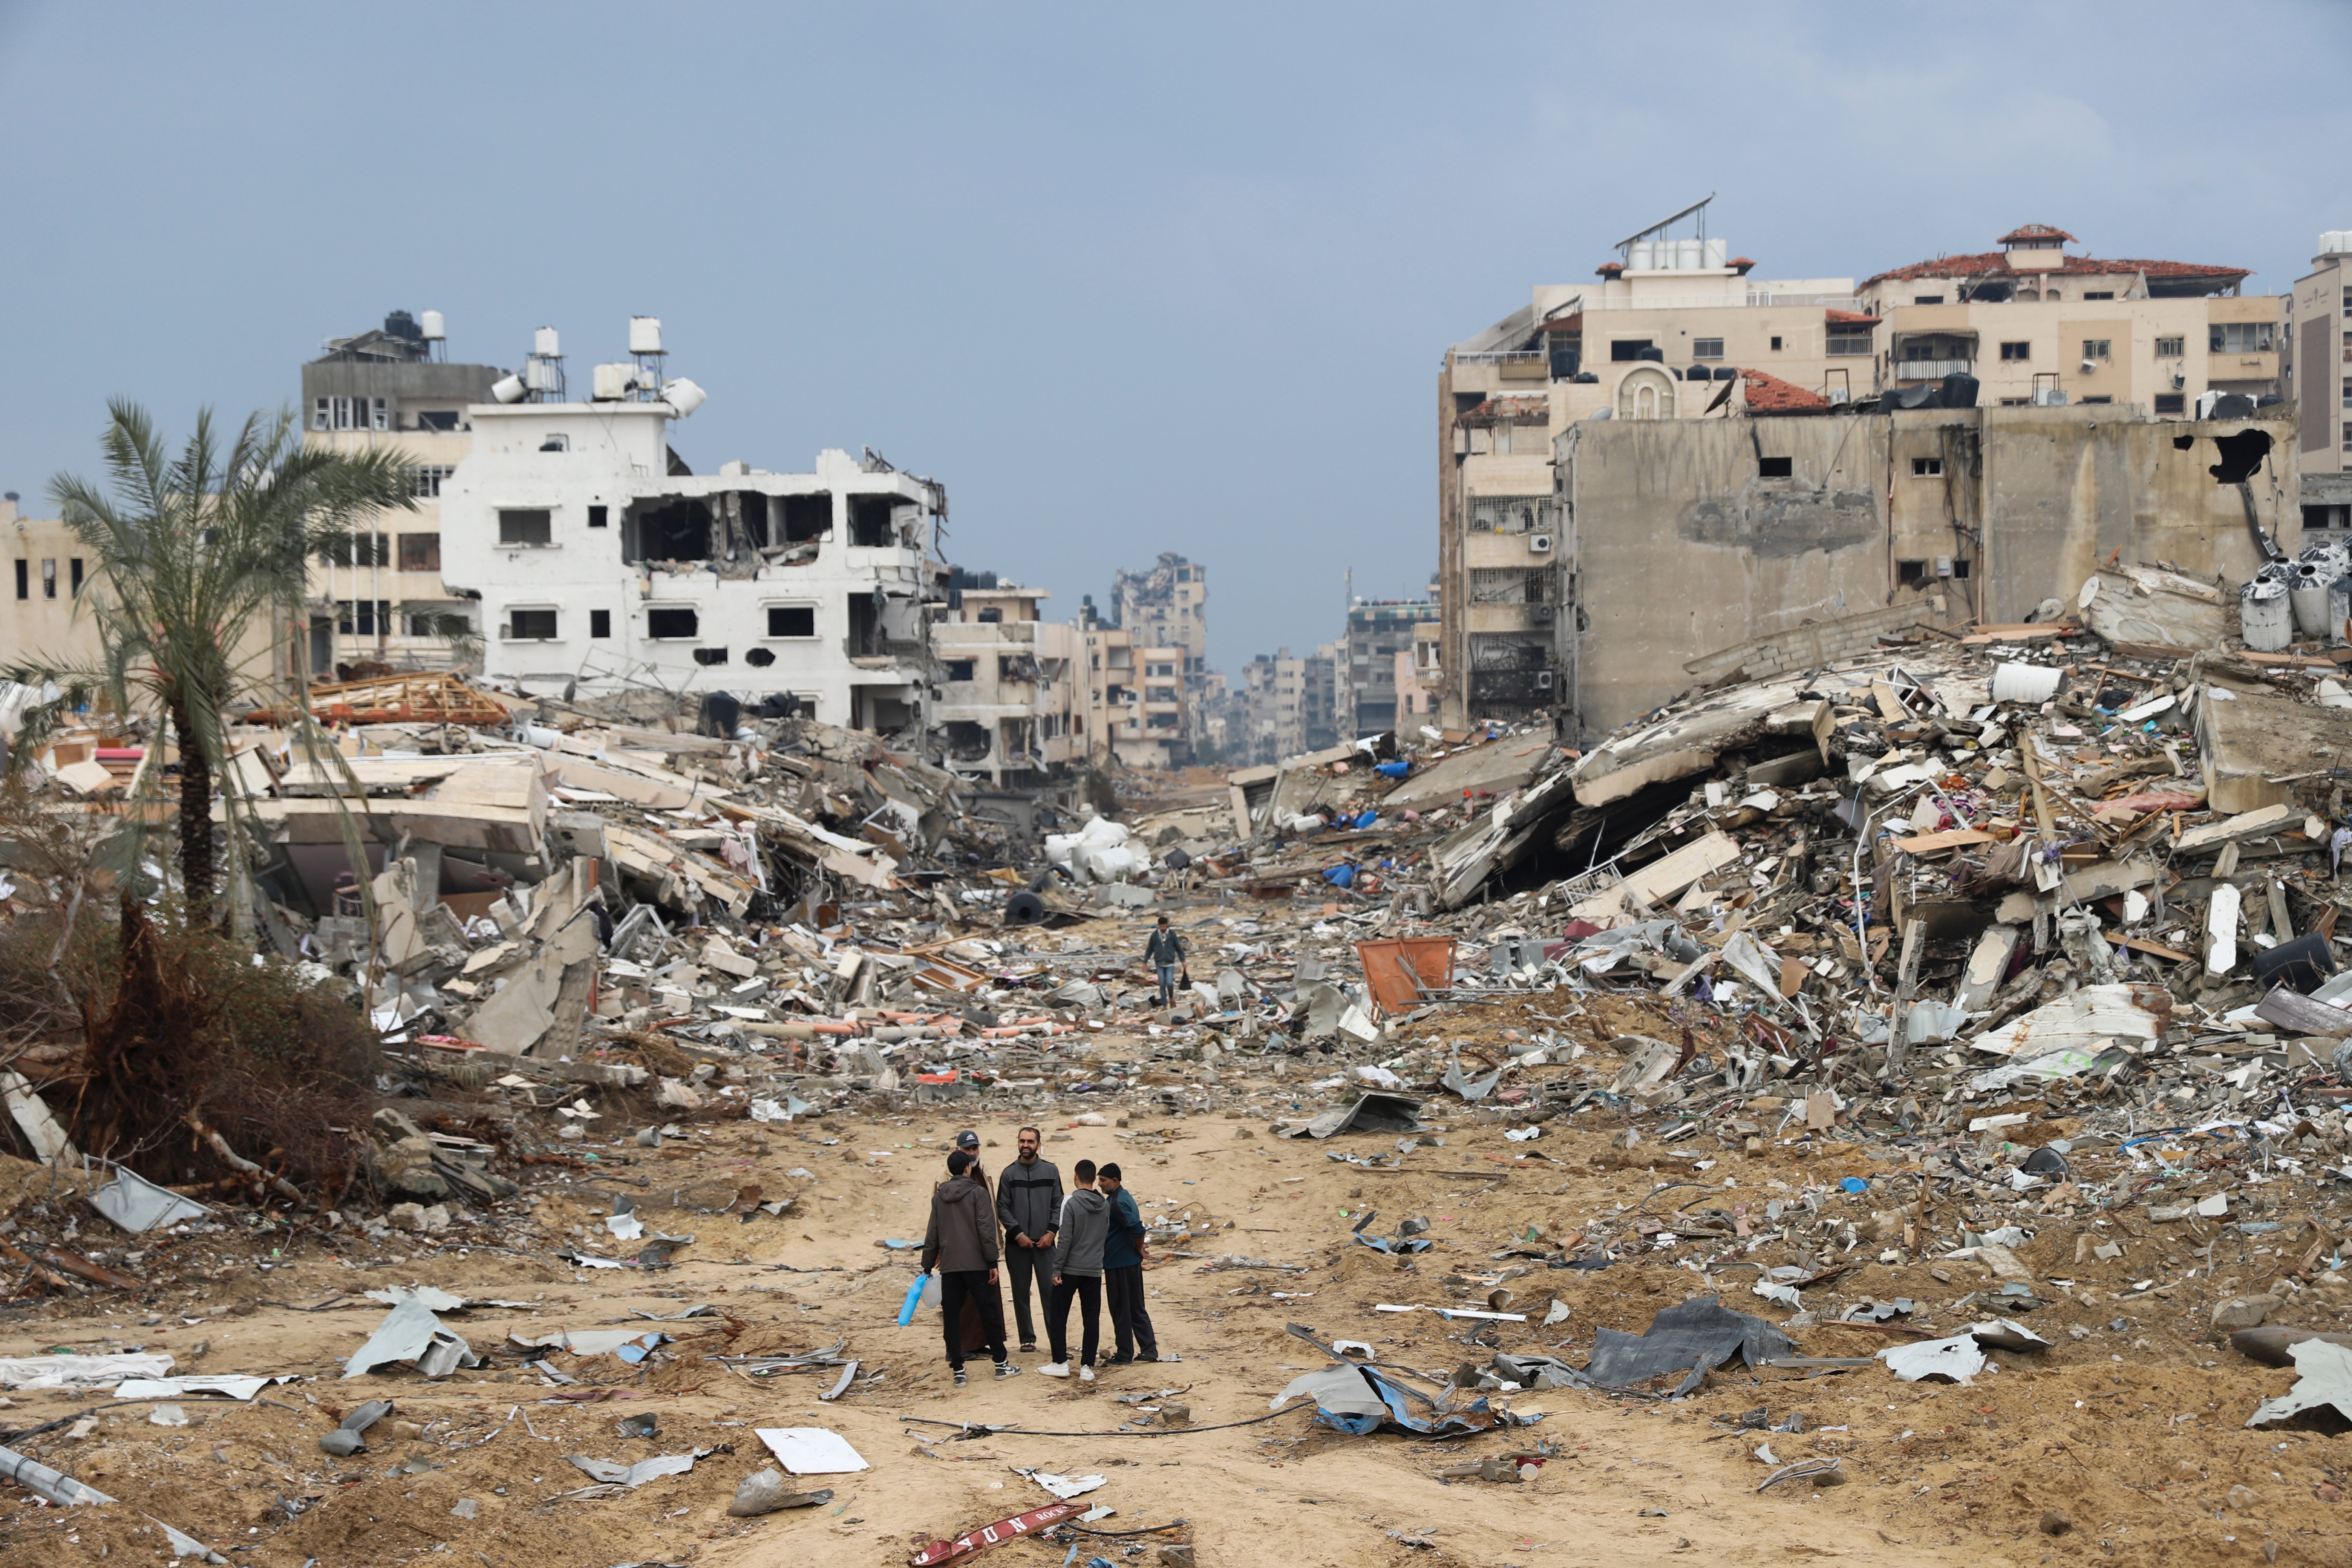 Palestinians in Gaza on 3 January walk past a building destroyed in an Israeli airstrike.